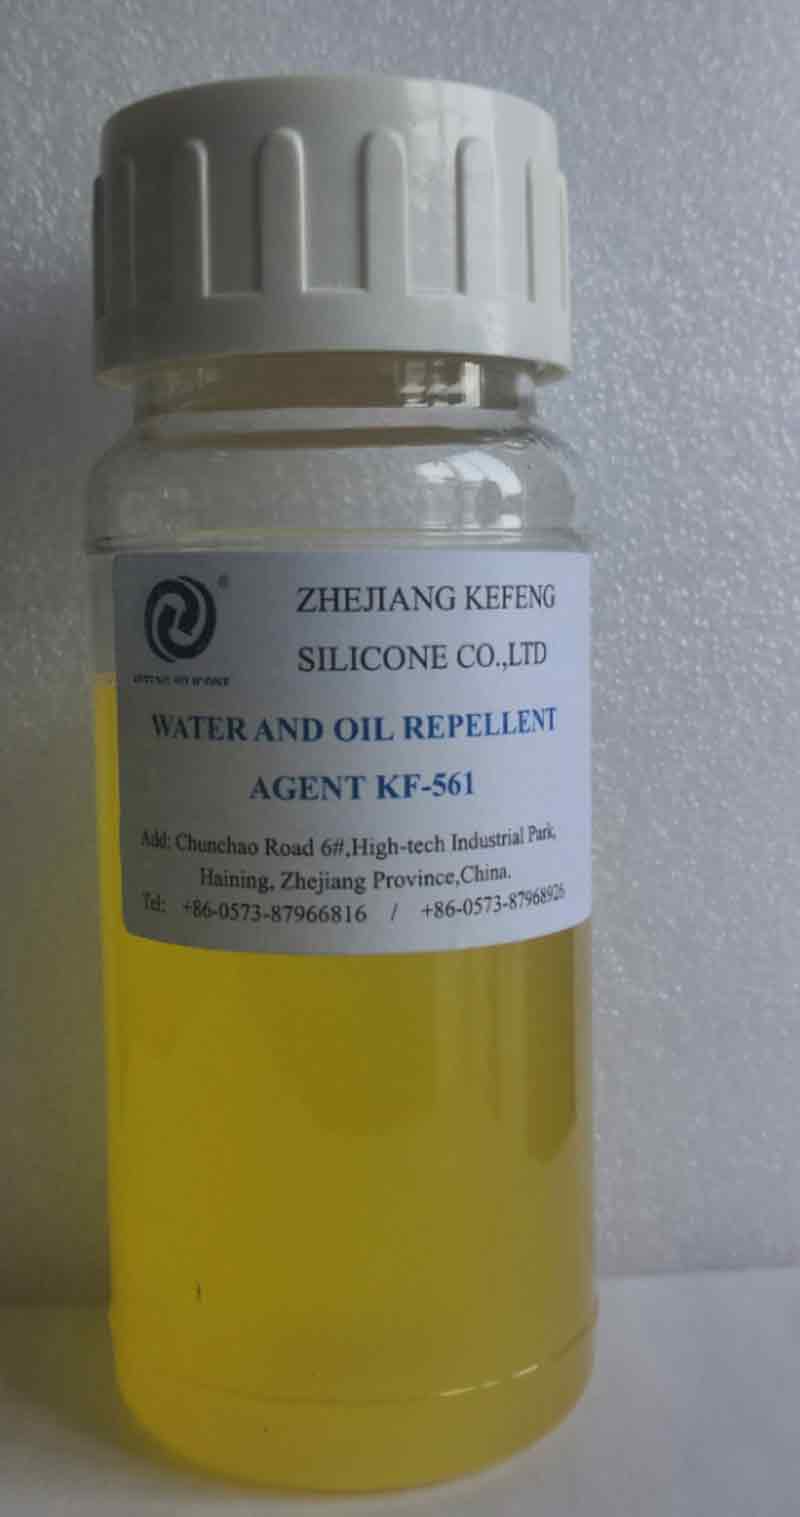 What Is Silicone Oil Based On?